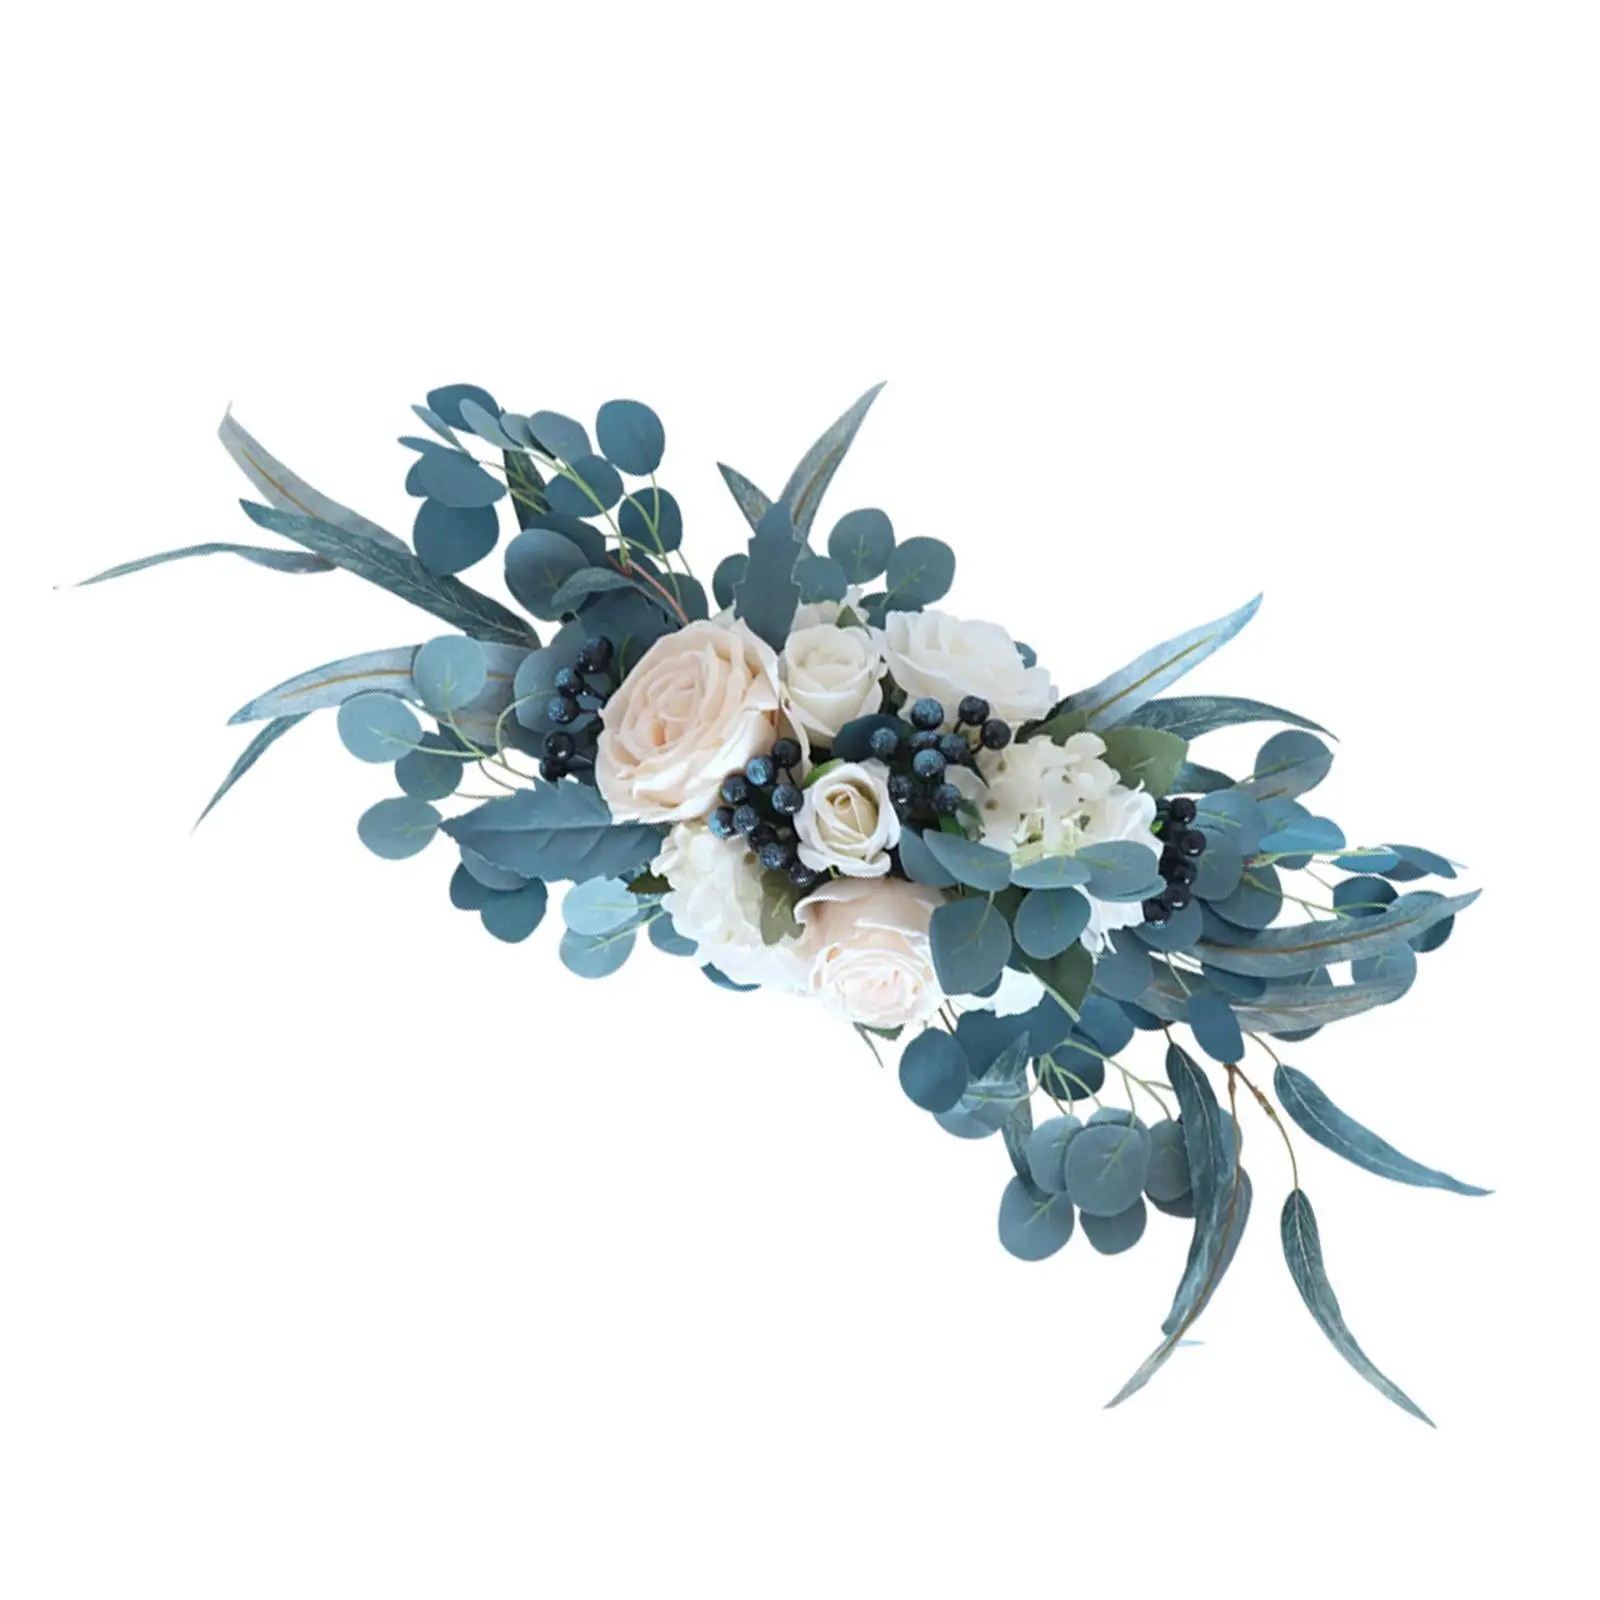 Farmhouse Artificial Flowers Arch Decor Centerpiece Garland Silk Flower Floral Swags for Holiday Window Bedroom Wall Decor